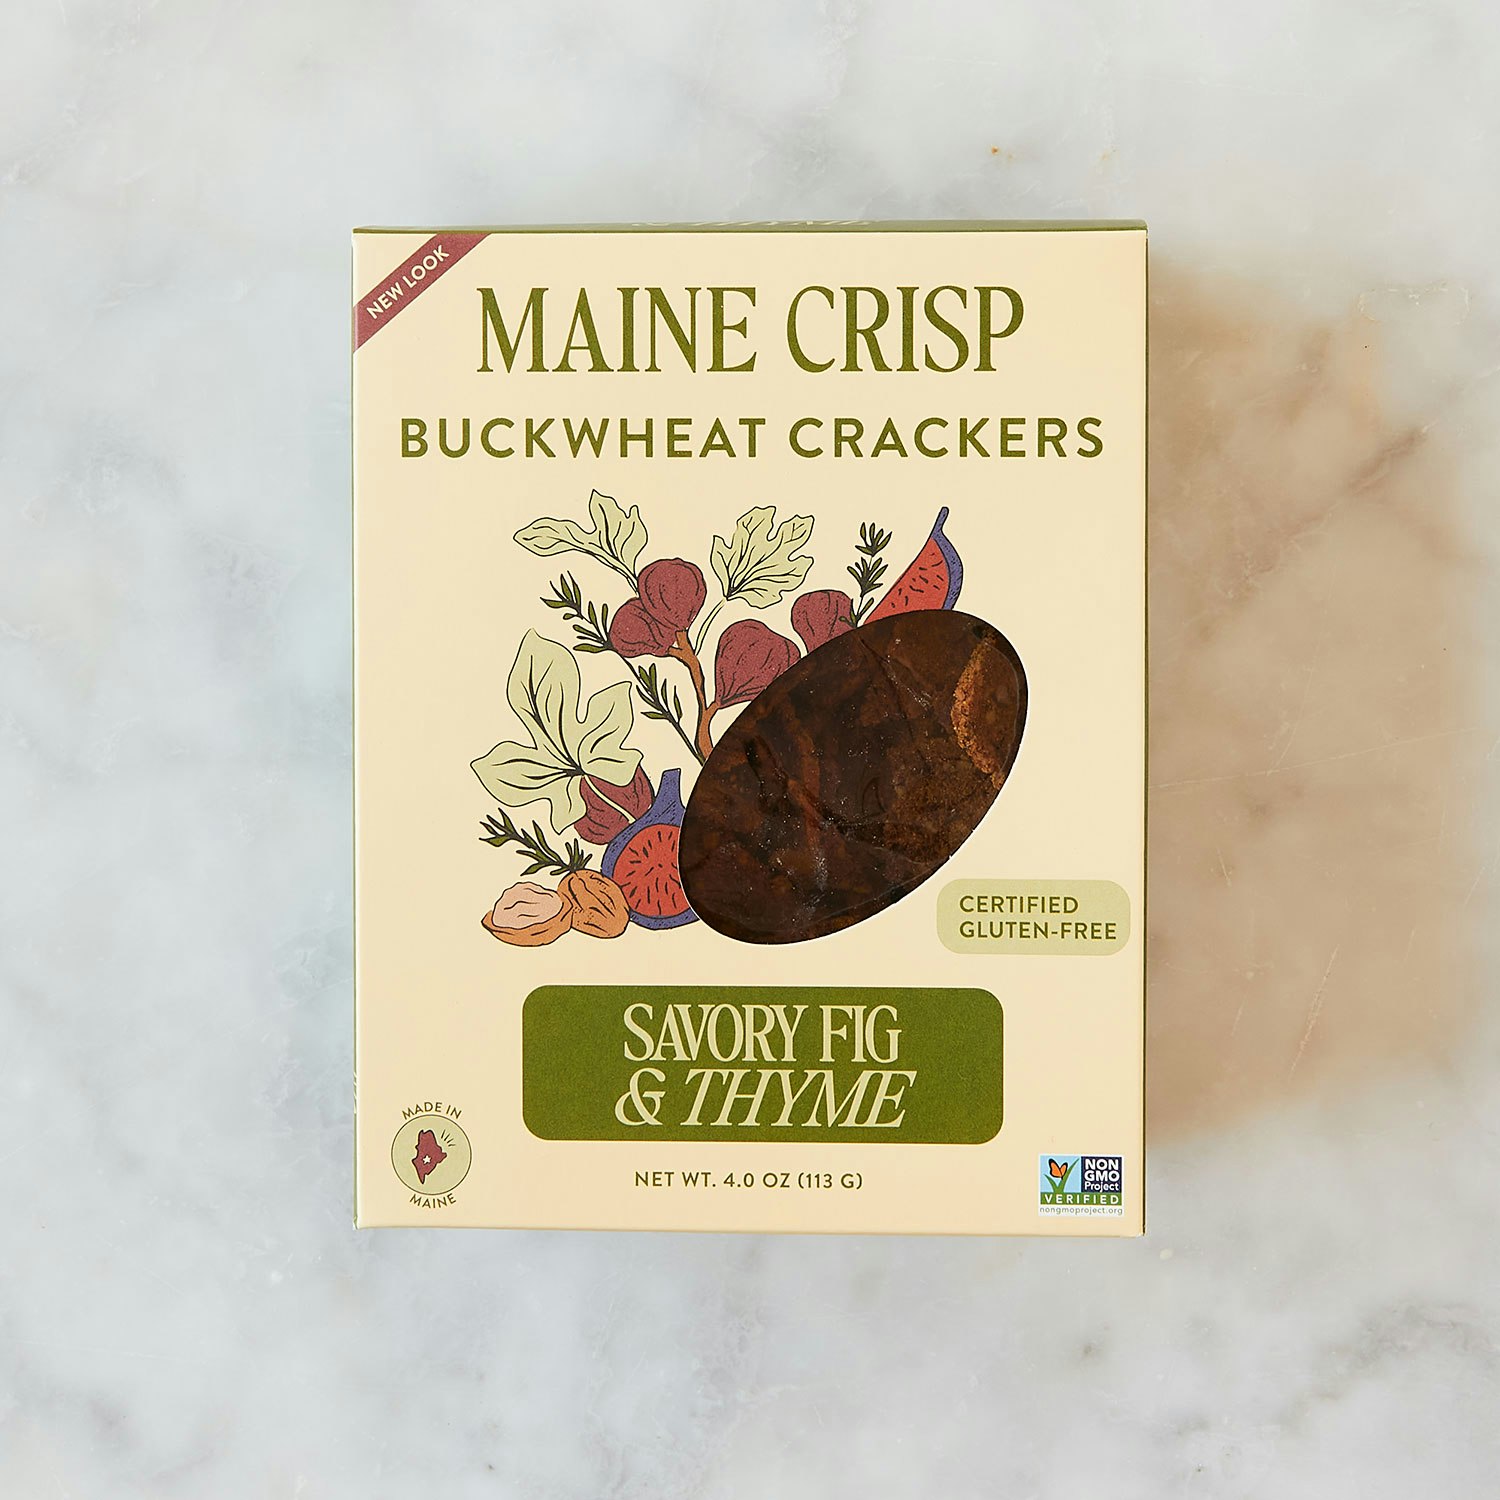 Maine-Crisp-Co-Savory-Fig-Thyme -Crisps-specialty-foods-124506-04